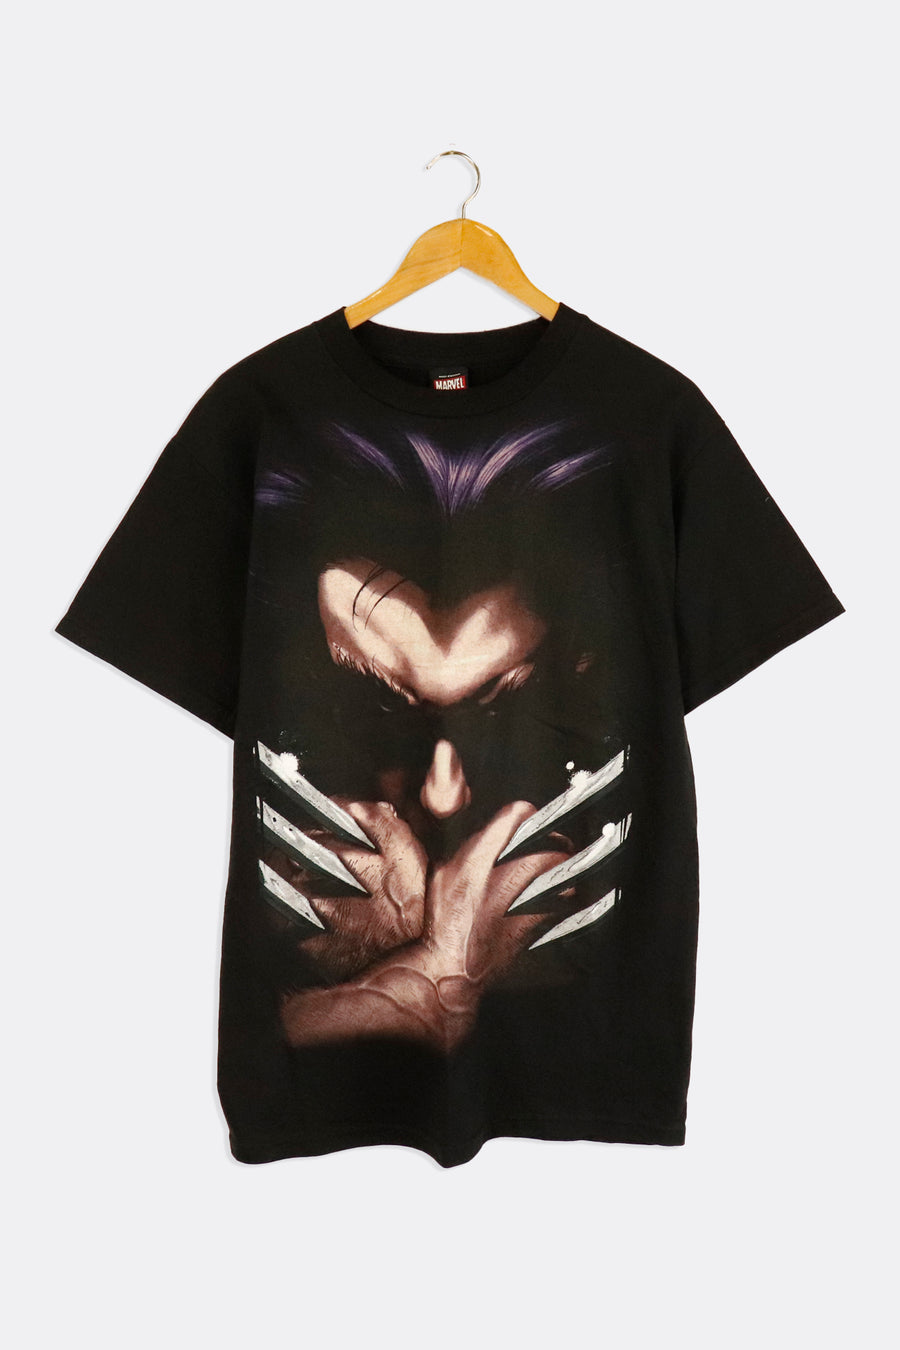 Vintage Marvel Wolverine Hands Crossed With Claws Out Shadowed Face Close Up Vinyl T Shirt Sz M